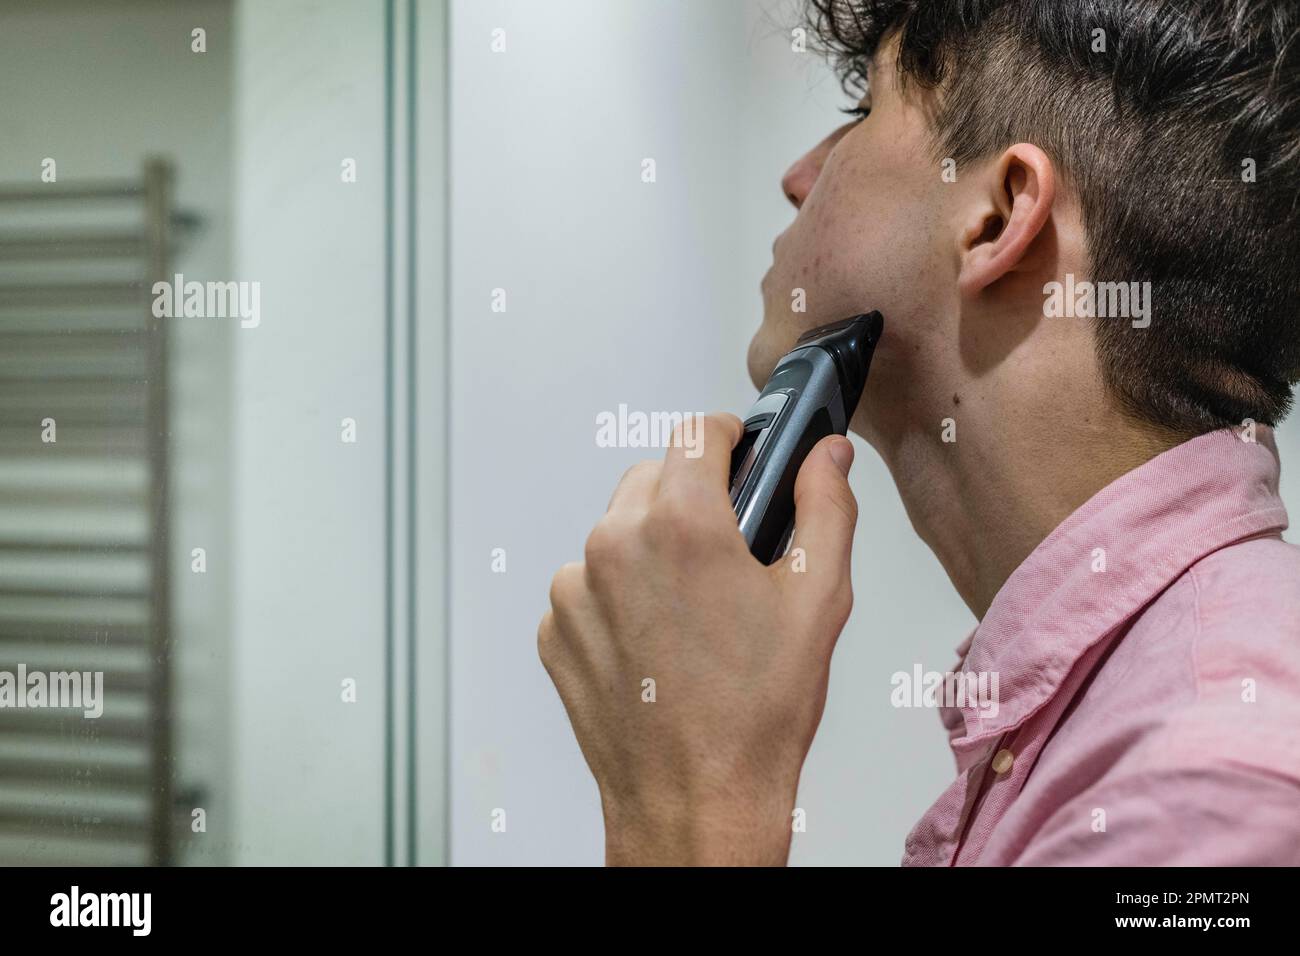 Teenager shaving, focused and looking into Mirror Stock Photo